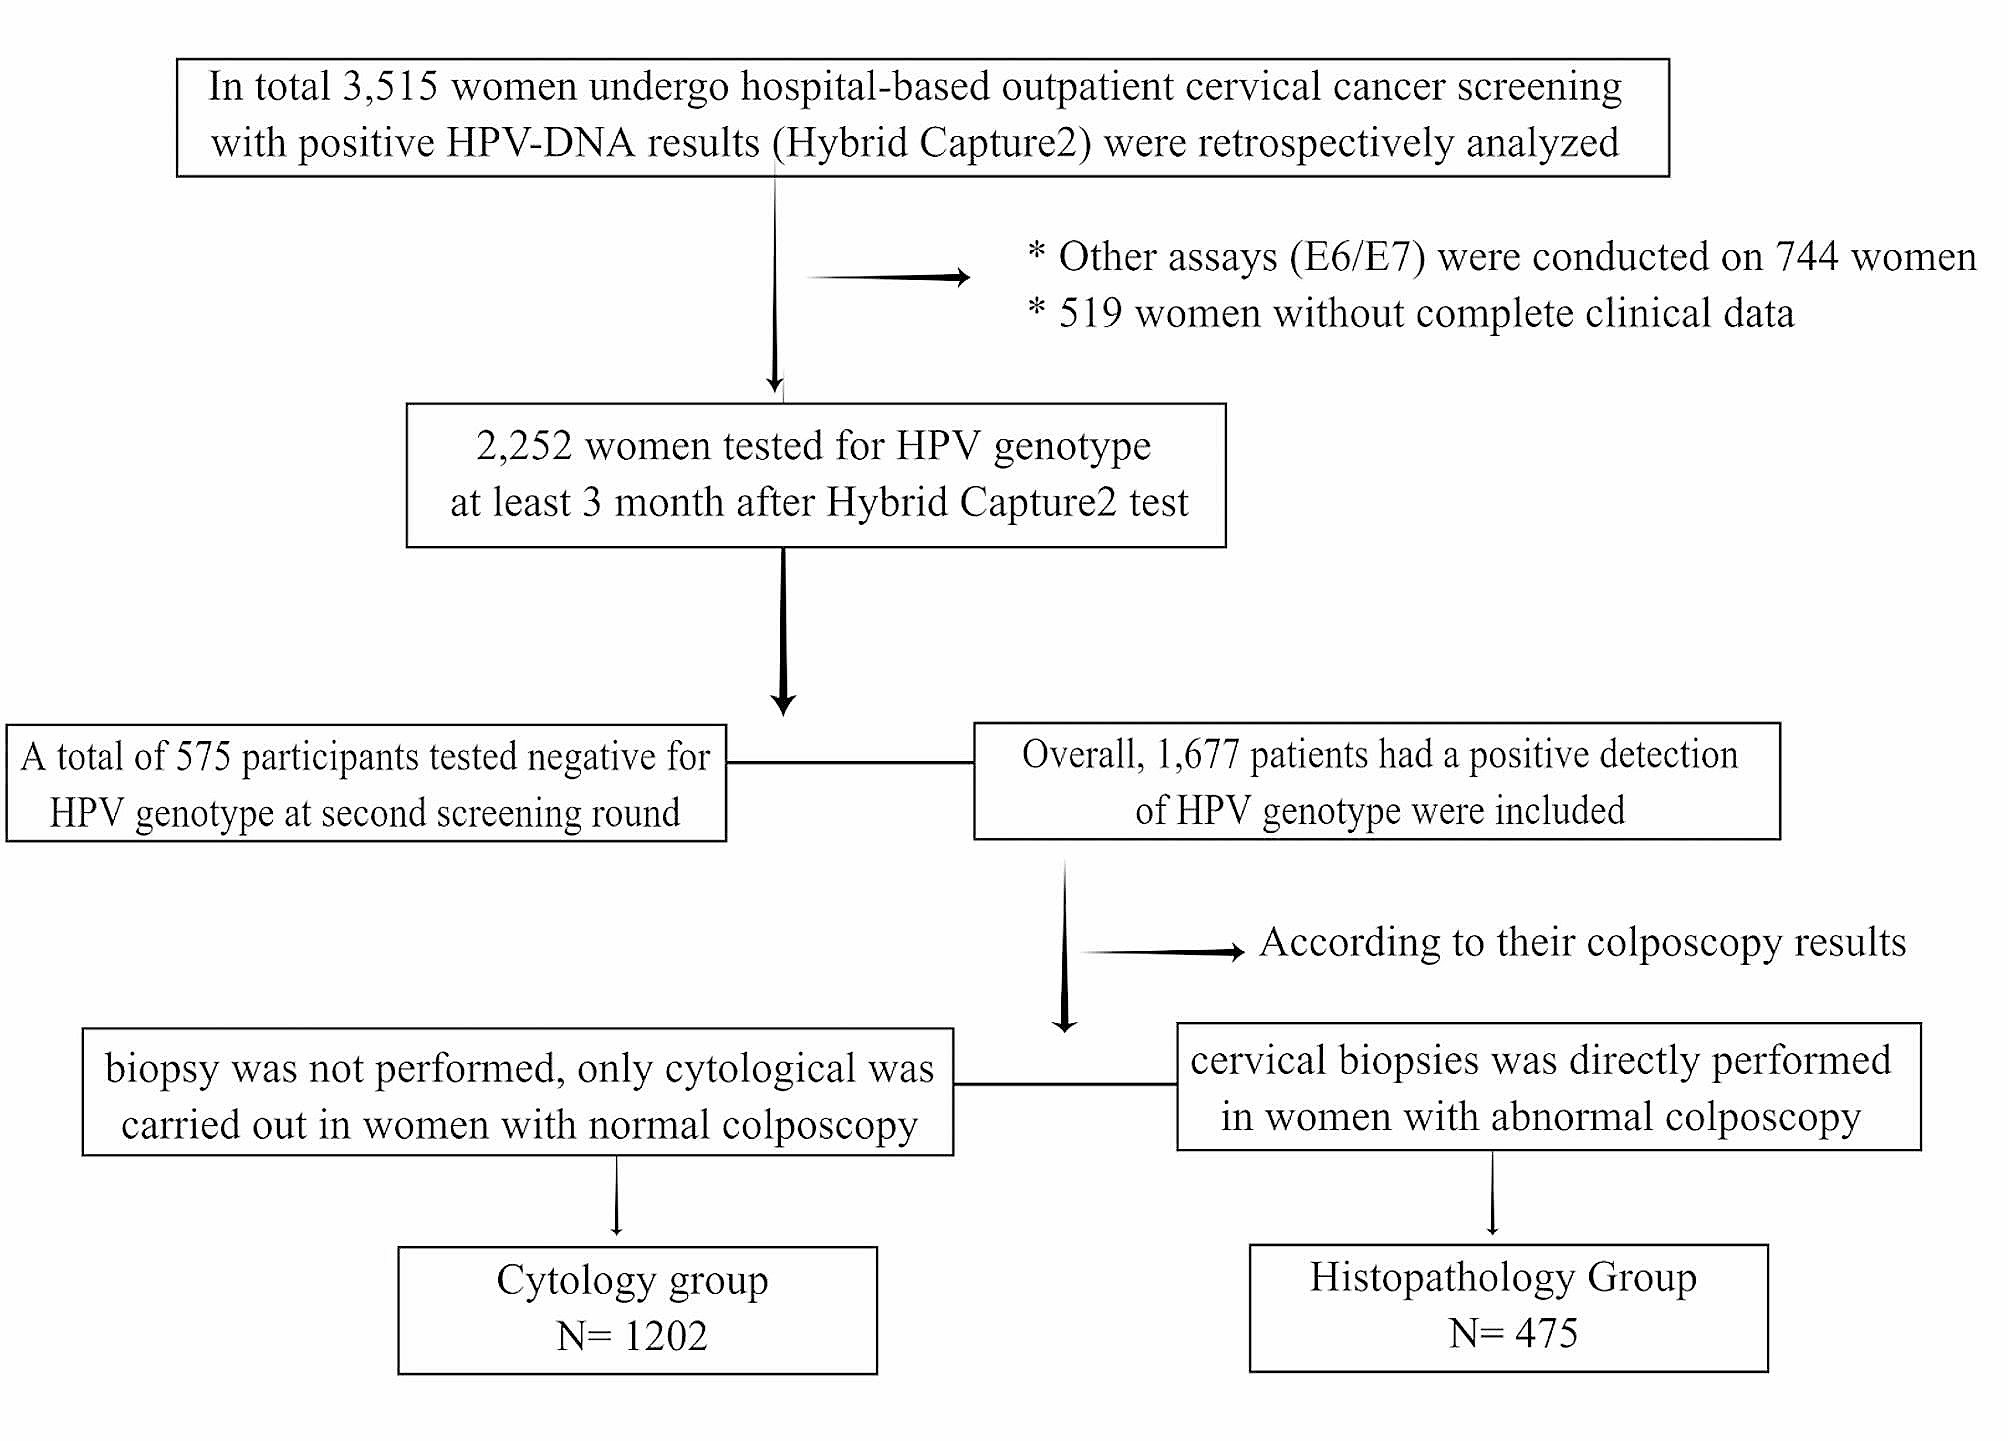 Multiple high-risk HPV infections probably associated with a higher risk of low-grade cytological abnormalities but not with high-grade intraepithelial lesions of the cervix